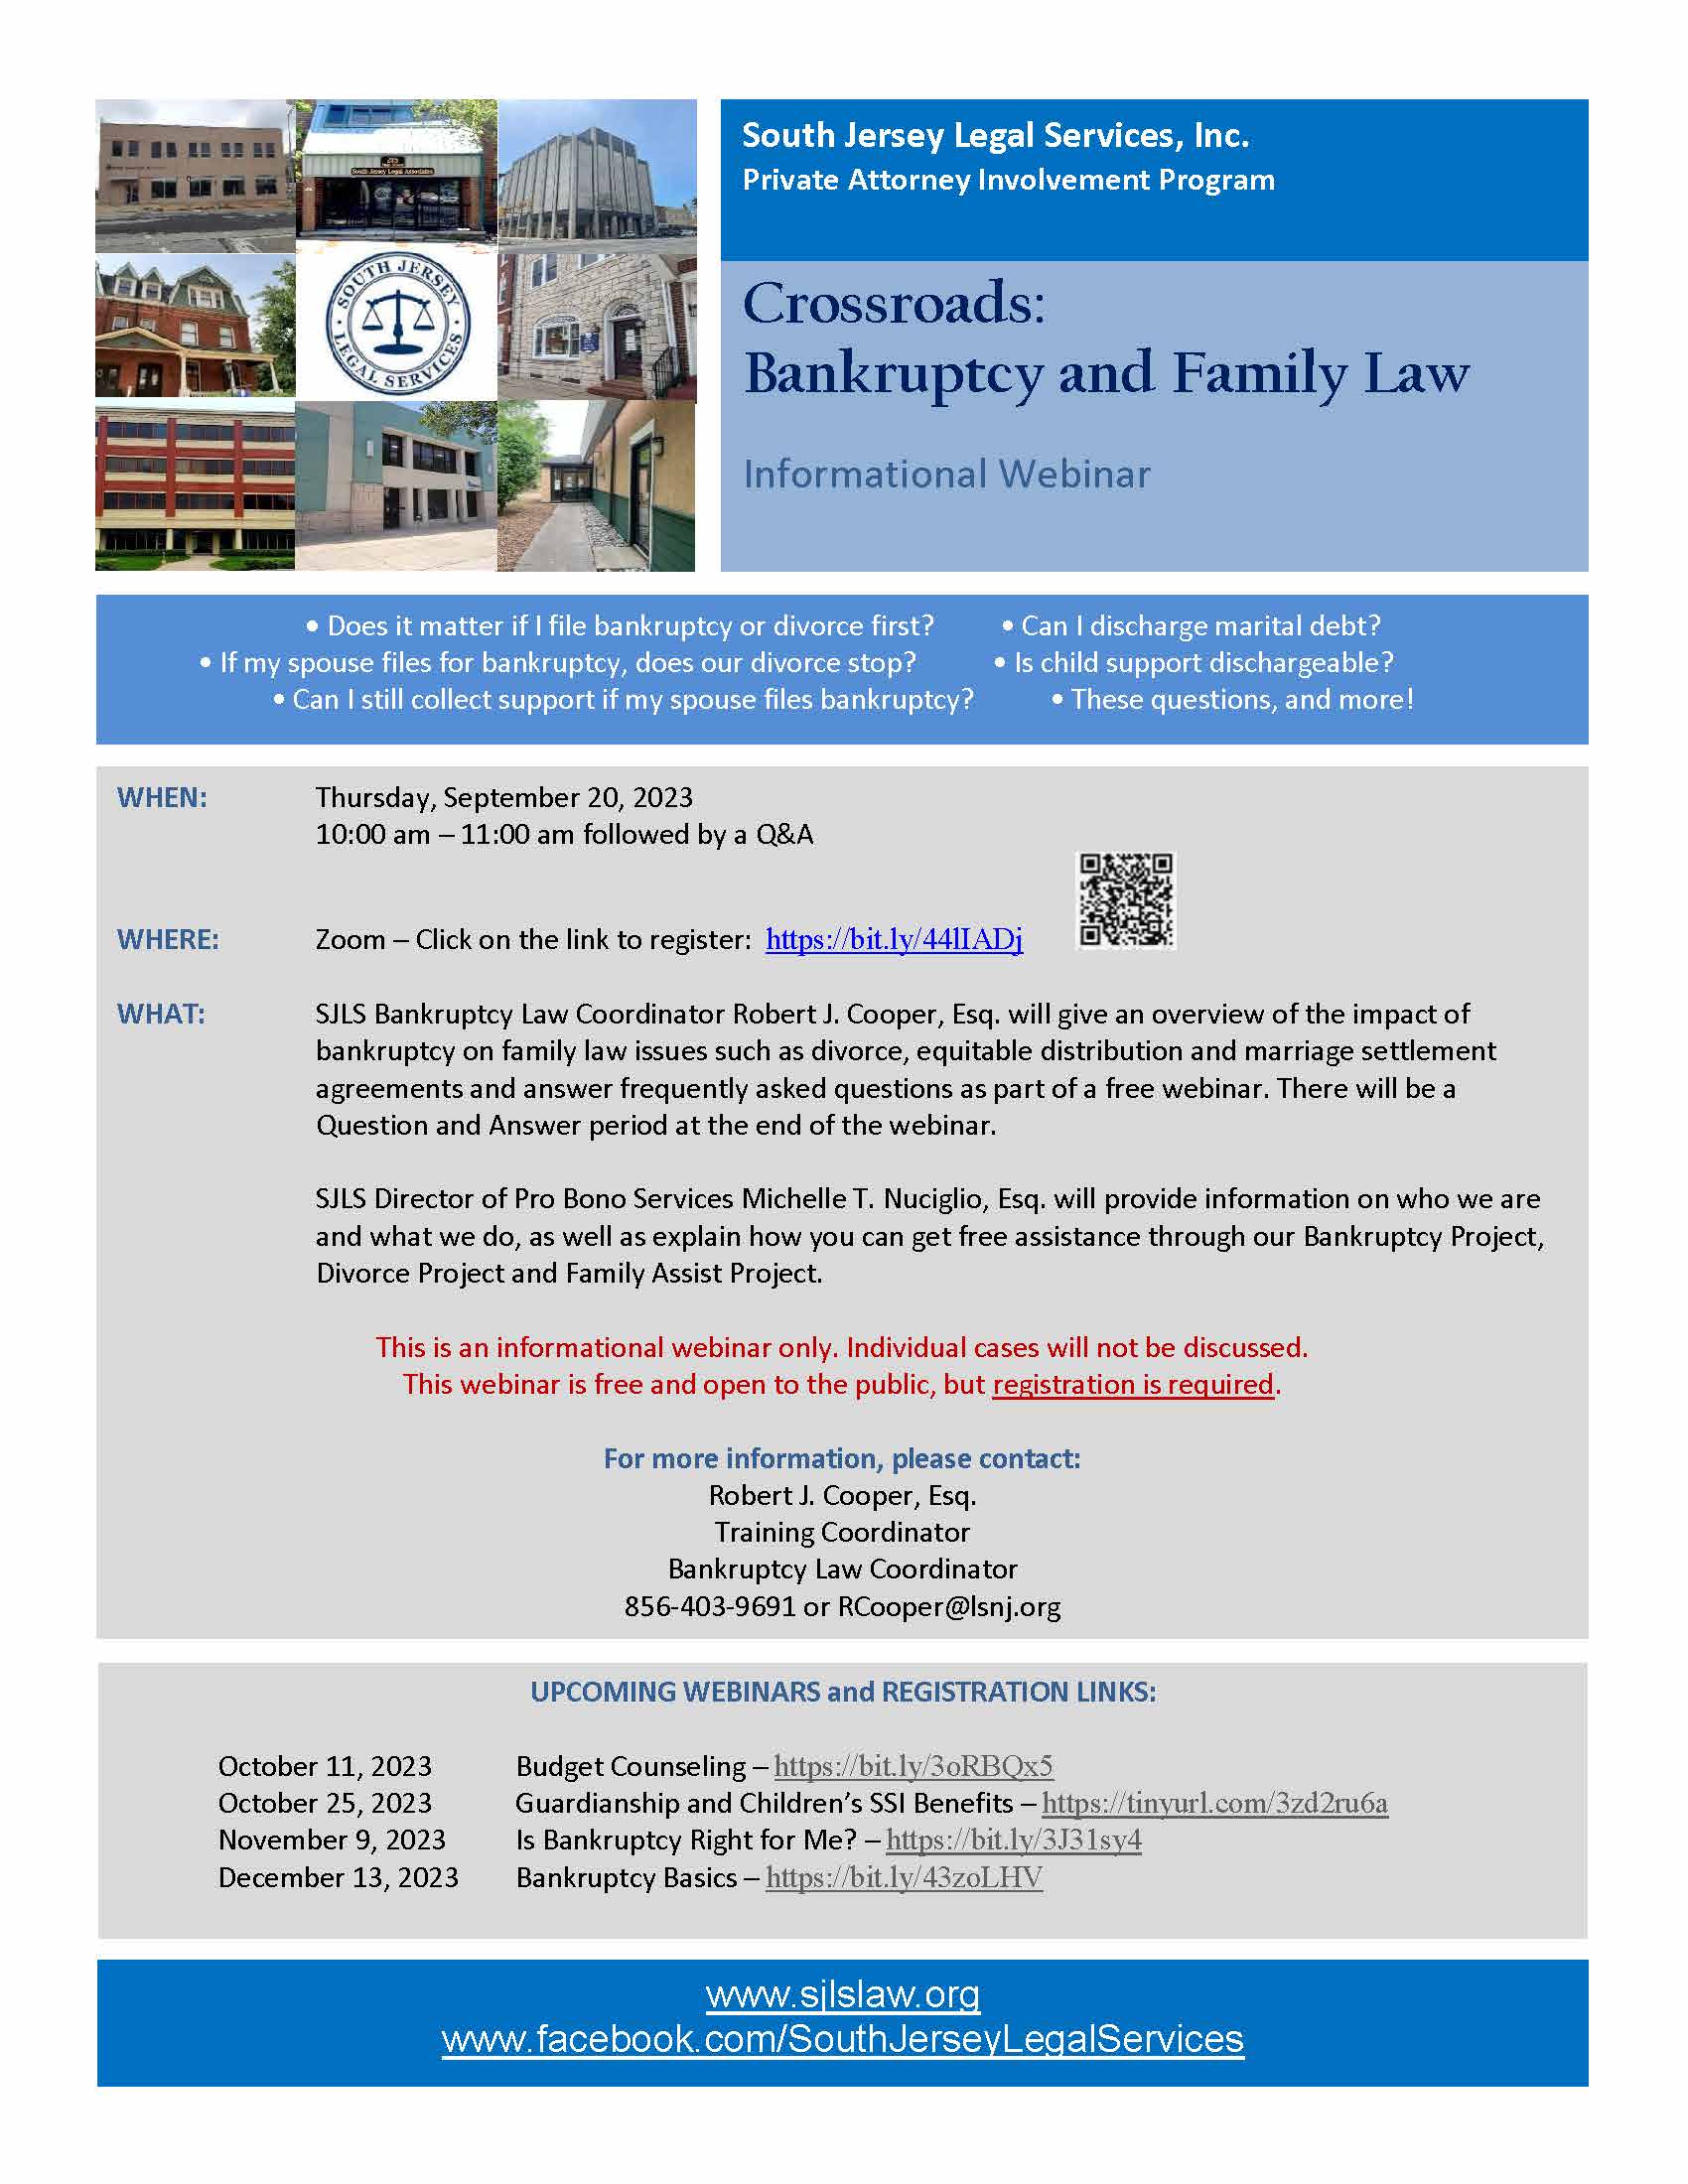 2023 Sept Crossroads Bankruptcy and Family Law